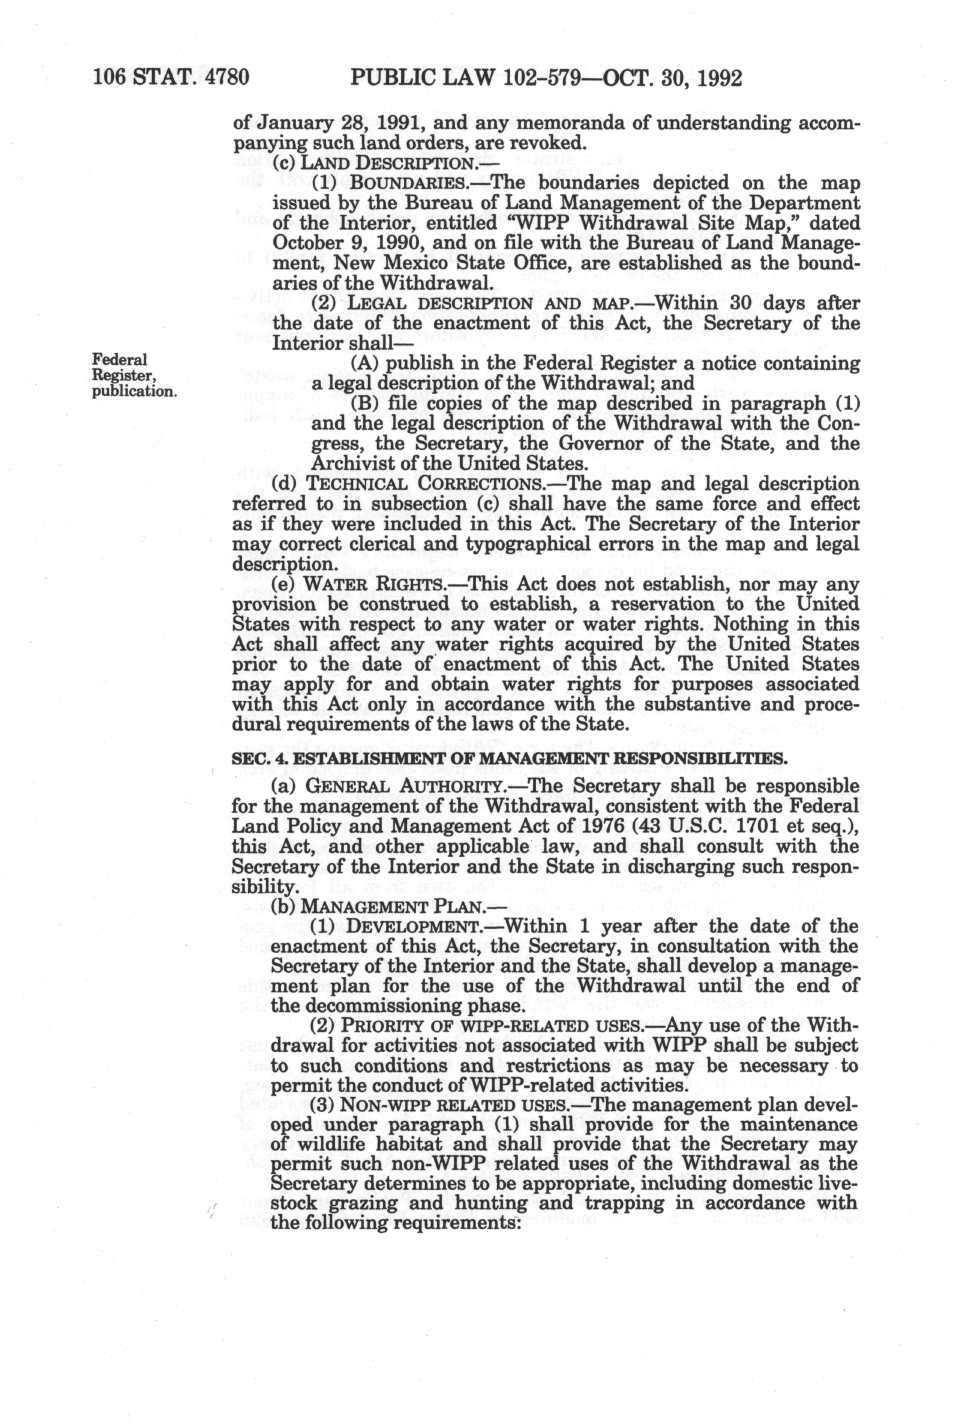 106 STAT. 4780 PUBLIC LAW 102-579 OCT. 30, 1992 Federal Register, publication. of January 28, 1991, and any memoranda of imderstanding accompanying such land orders, are revoked. (c) LAND DESCRIPTION.